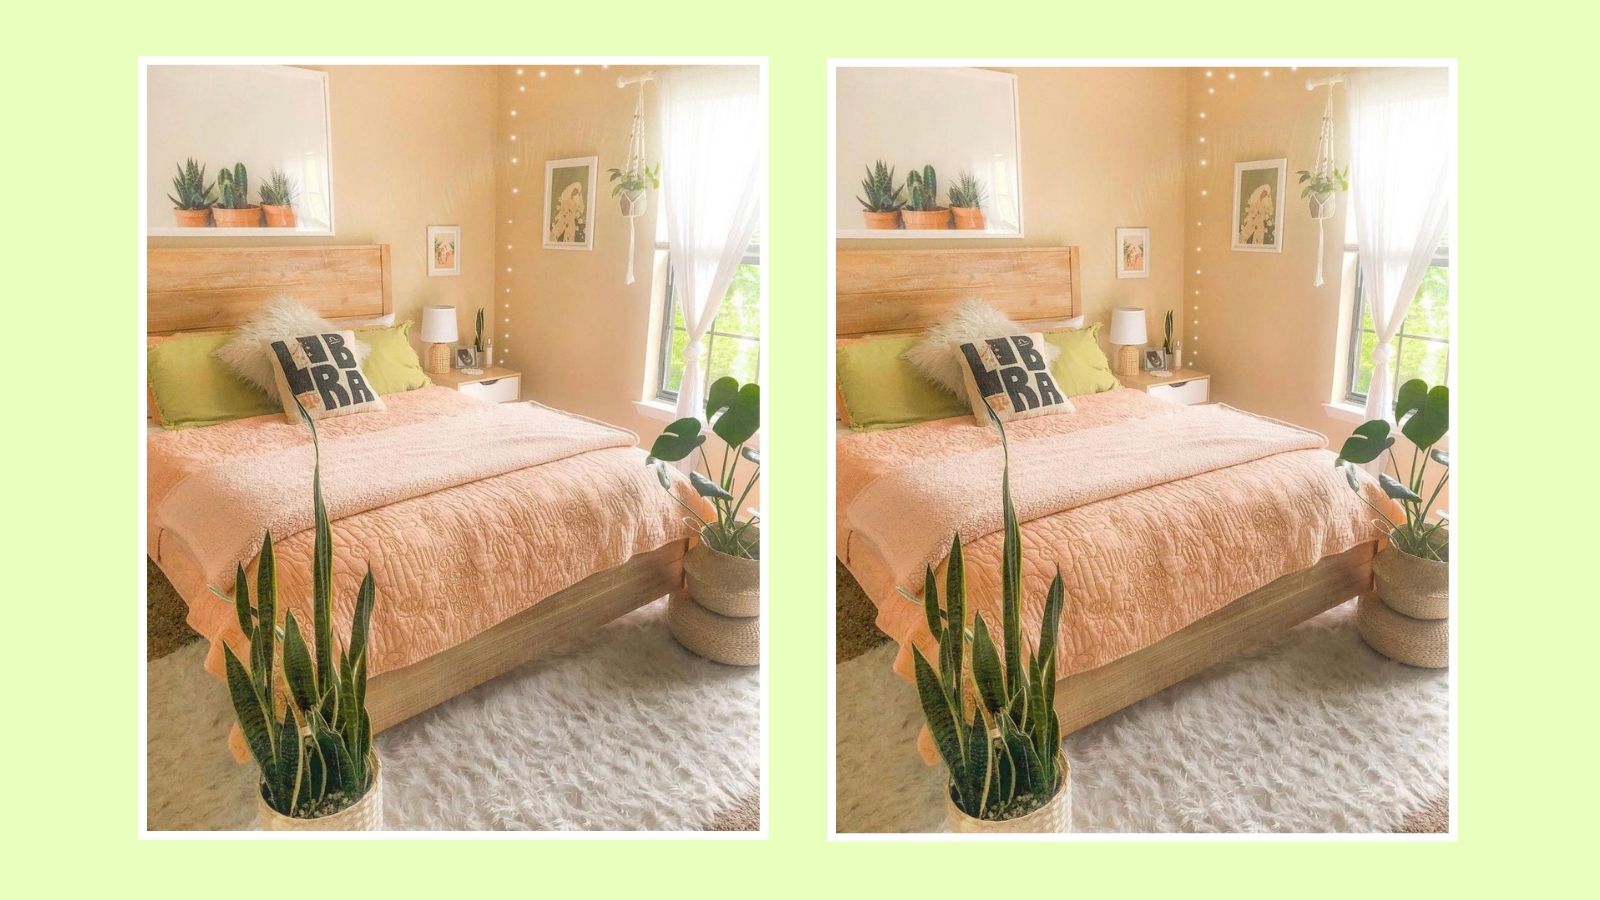 Feng shui for a small bedroom: 10 ways to keep it peaceful